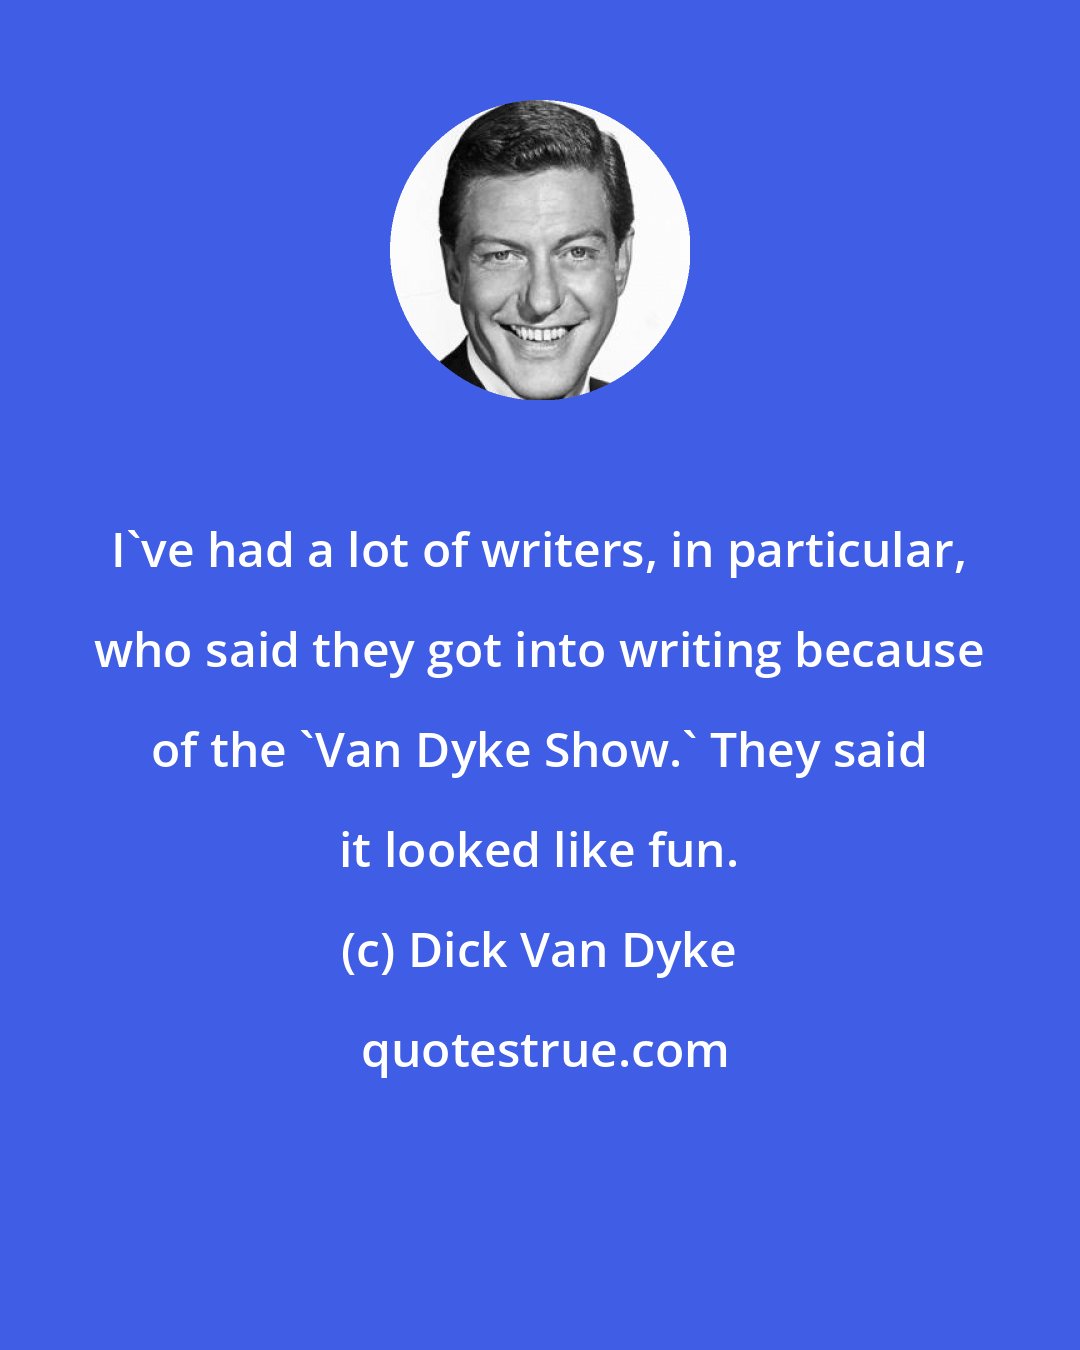 Dick Van Dyke: I've had a lot of writers, in particular, who said they got into writing because of the 'Van Dyke Show.' They said it looked like fun.